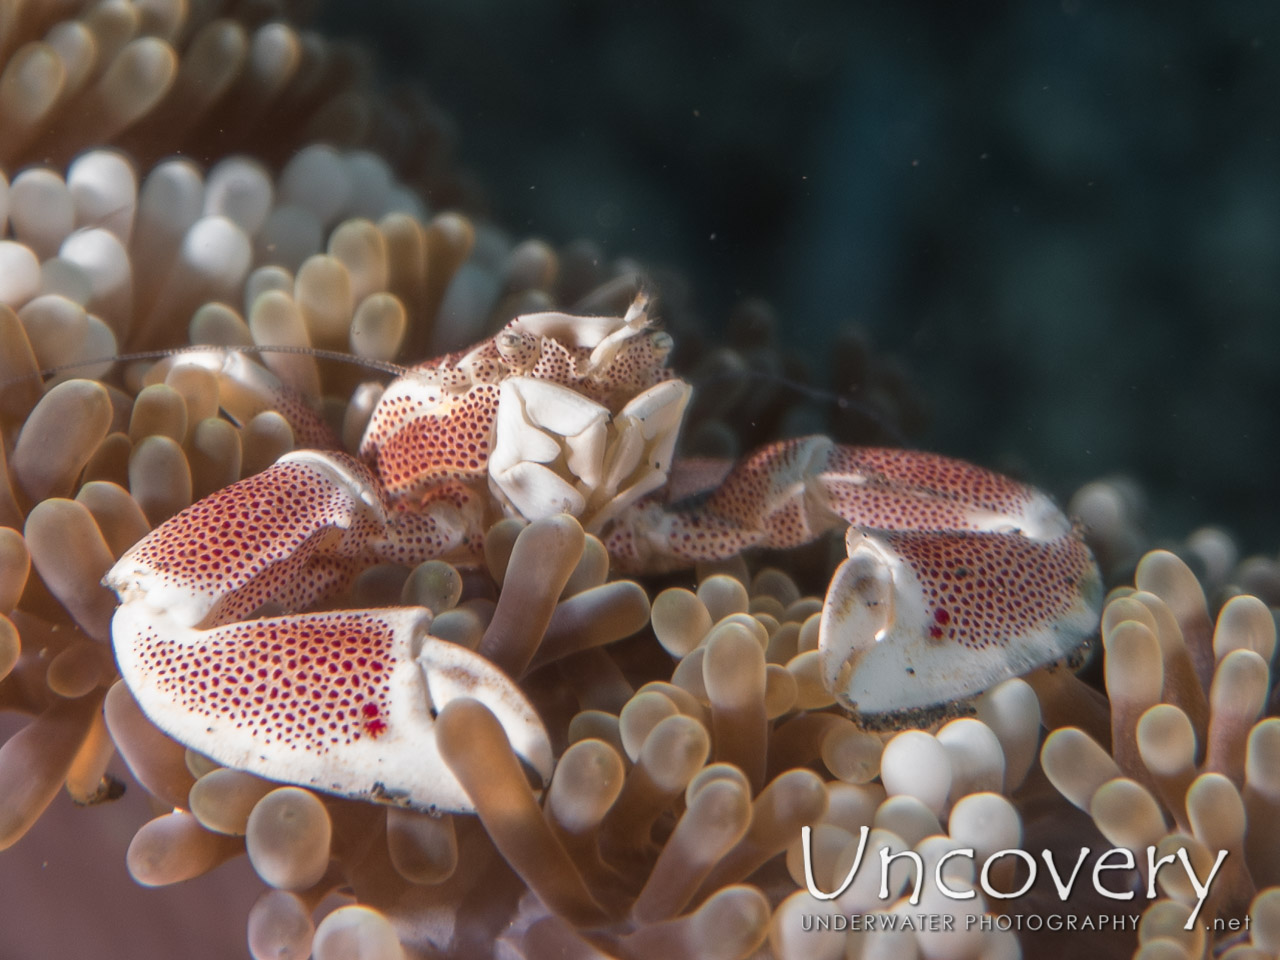 Spotted Porcelain Crab (neopetrolisthes Maculatus), photo taken in Indonesia, North Sulawesi, Lembeh Strait, TK 2